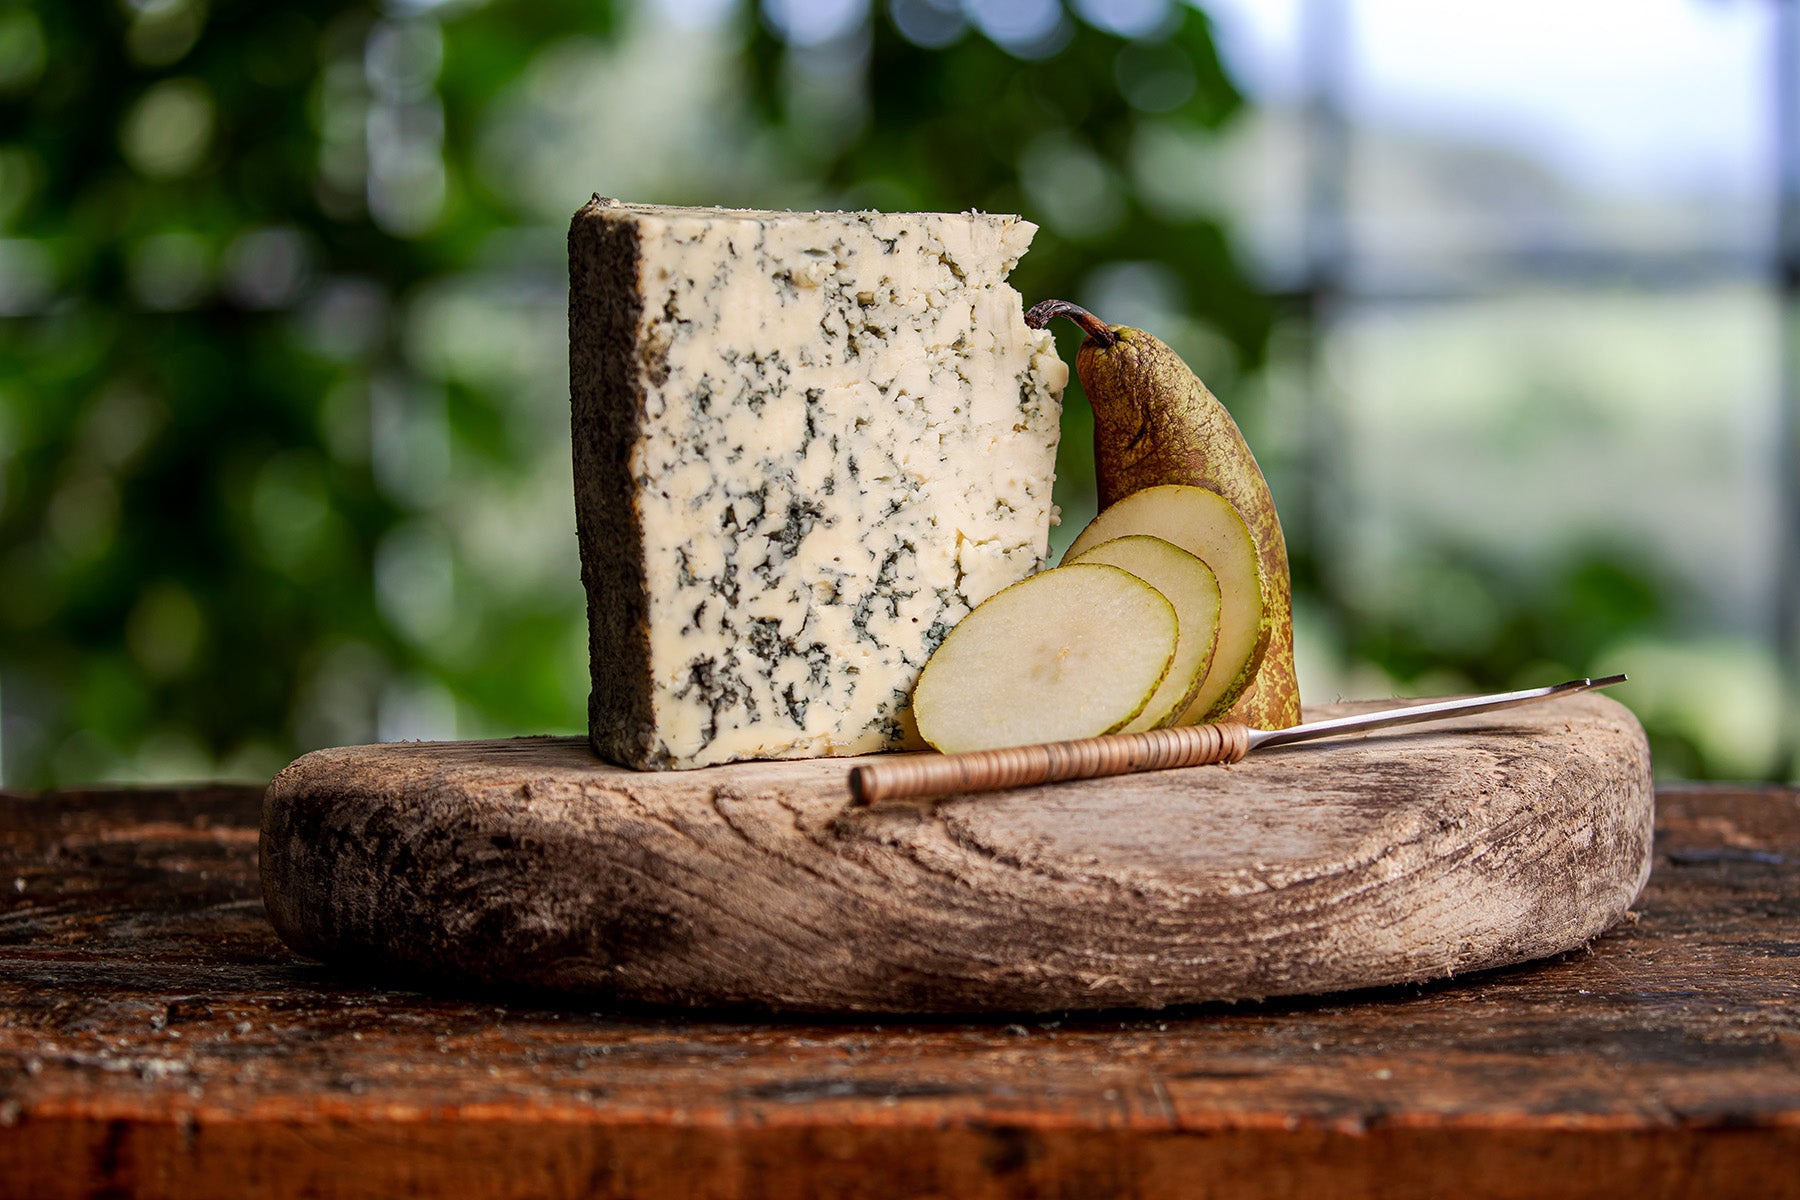 Portion of Hebridean Blue cheese on an old cheese follower with a pear